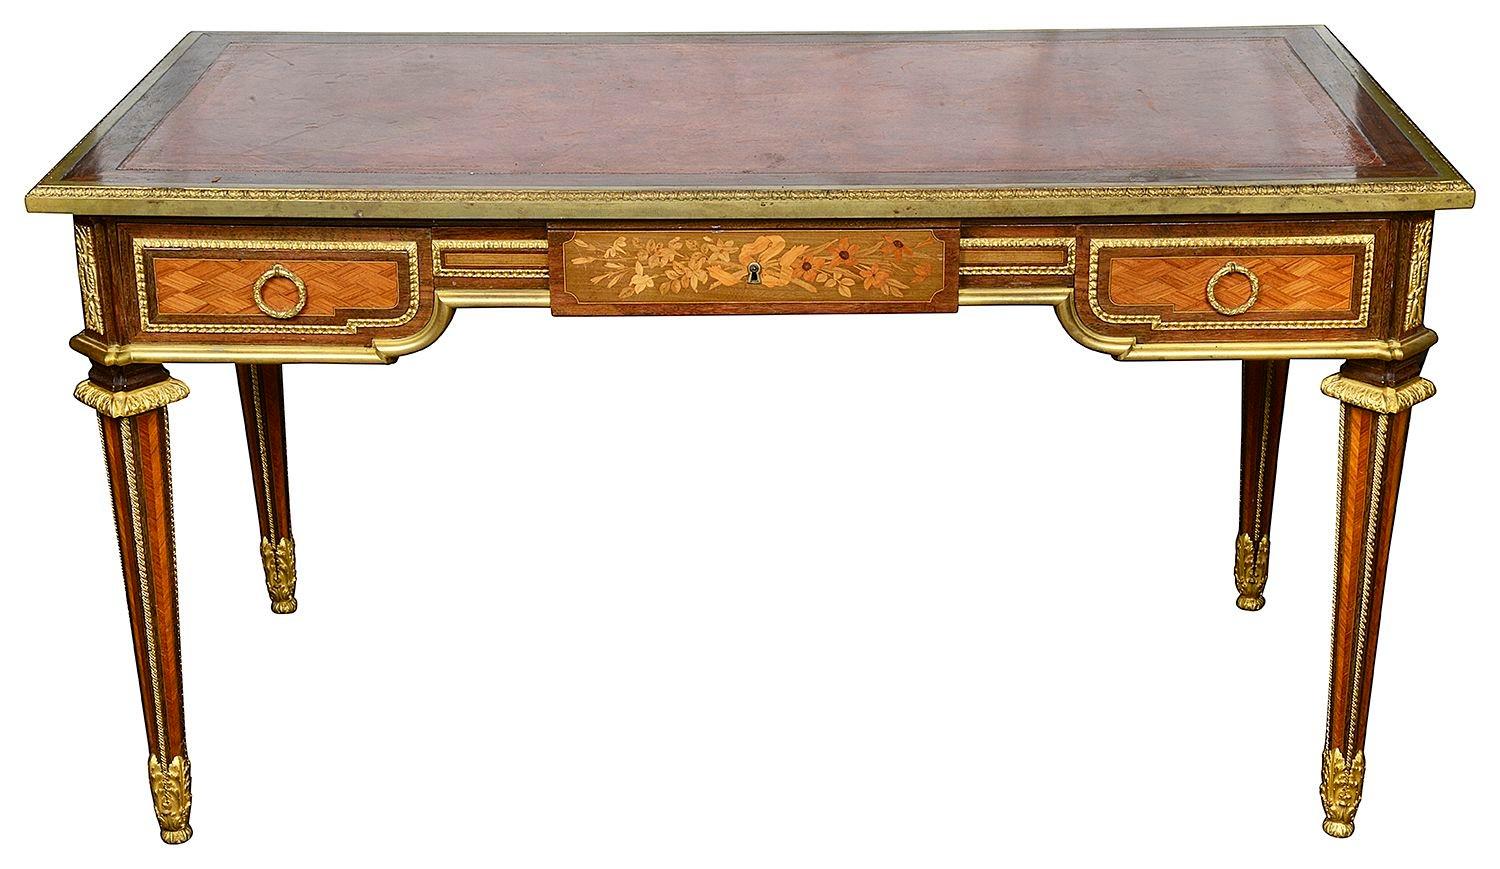 A very good quality late 19th Century French Louis XVI style bureau plat. Having an inset leather top, gilded ormolu mouldings and mounts. Trellis parquetry to the frieze, with floral inlaid marquetry panels to the four sides. Three frieze drawers,